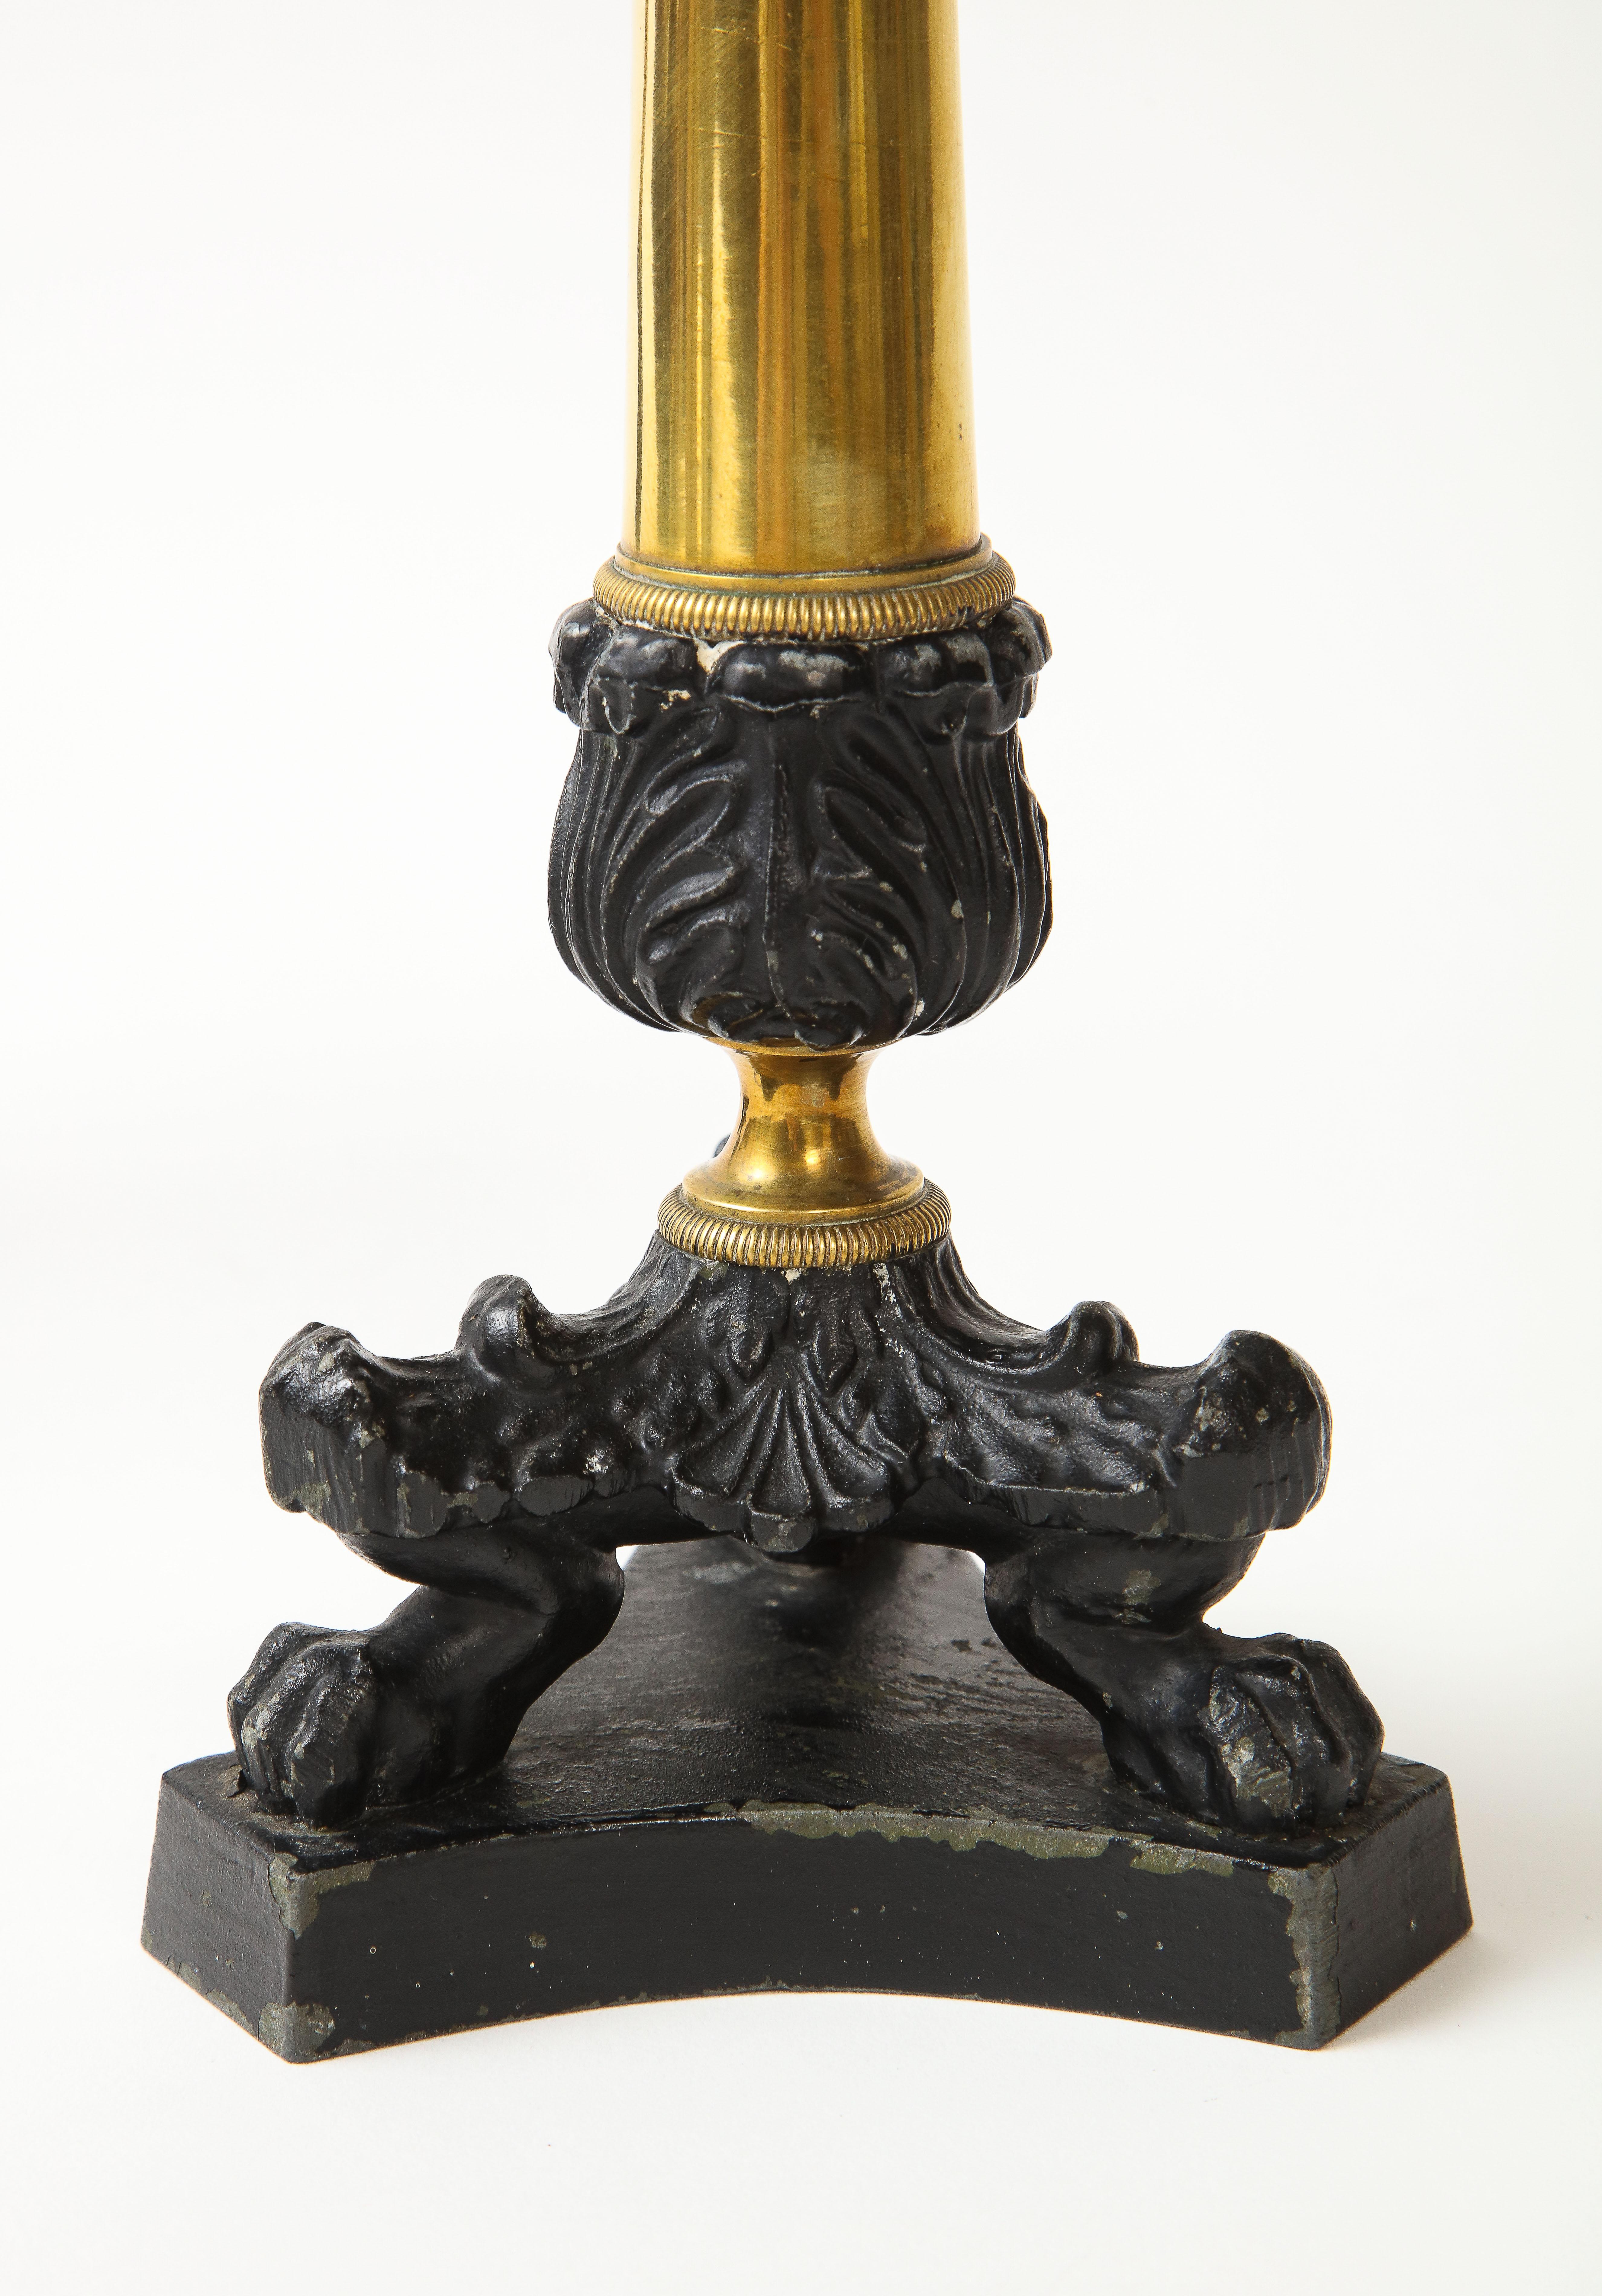 Pair of French Empire Polished Brass and Black-Enameled Cast Iron Candlesticks For Sale 2